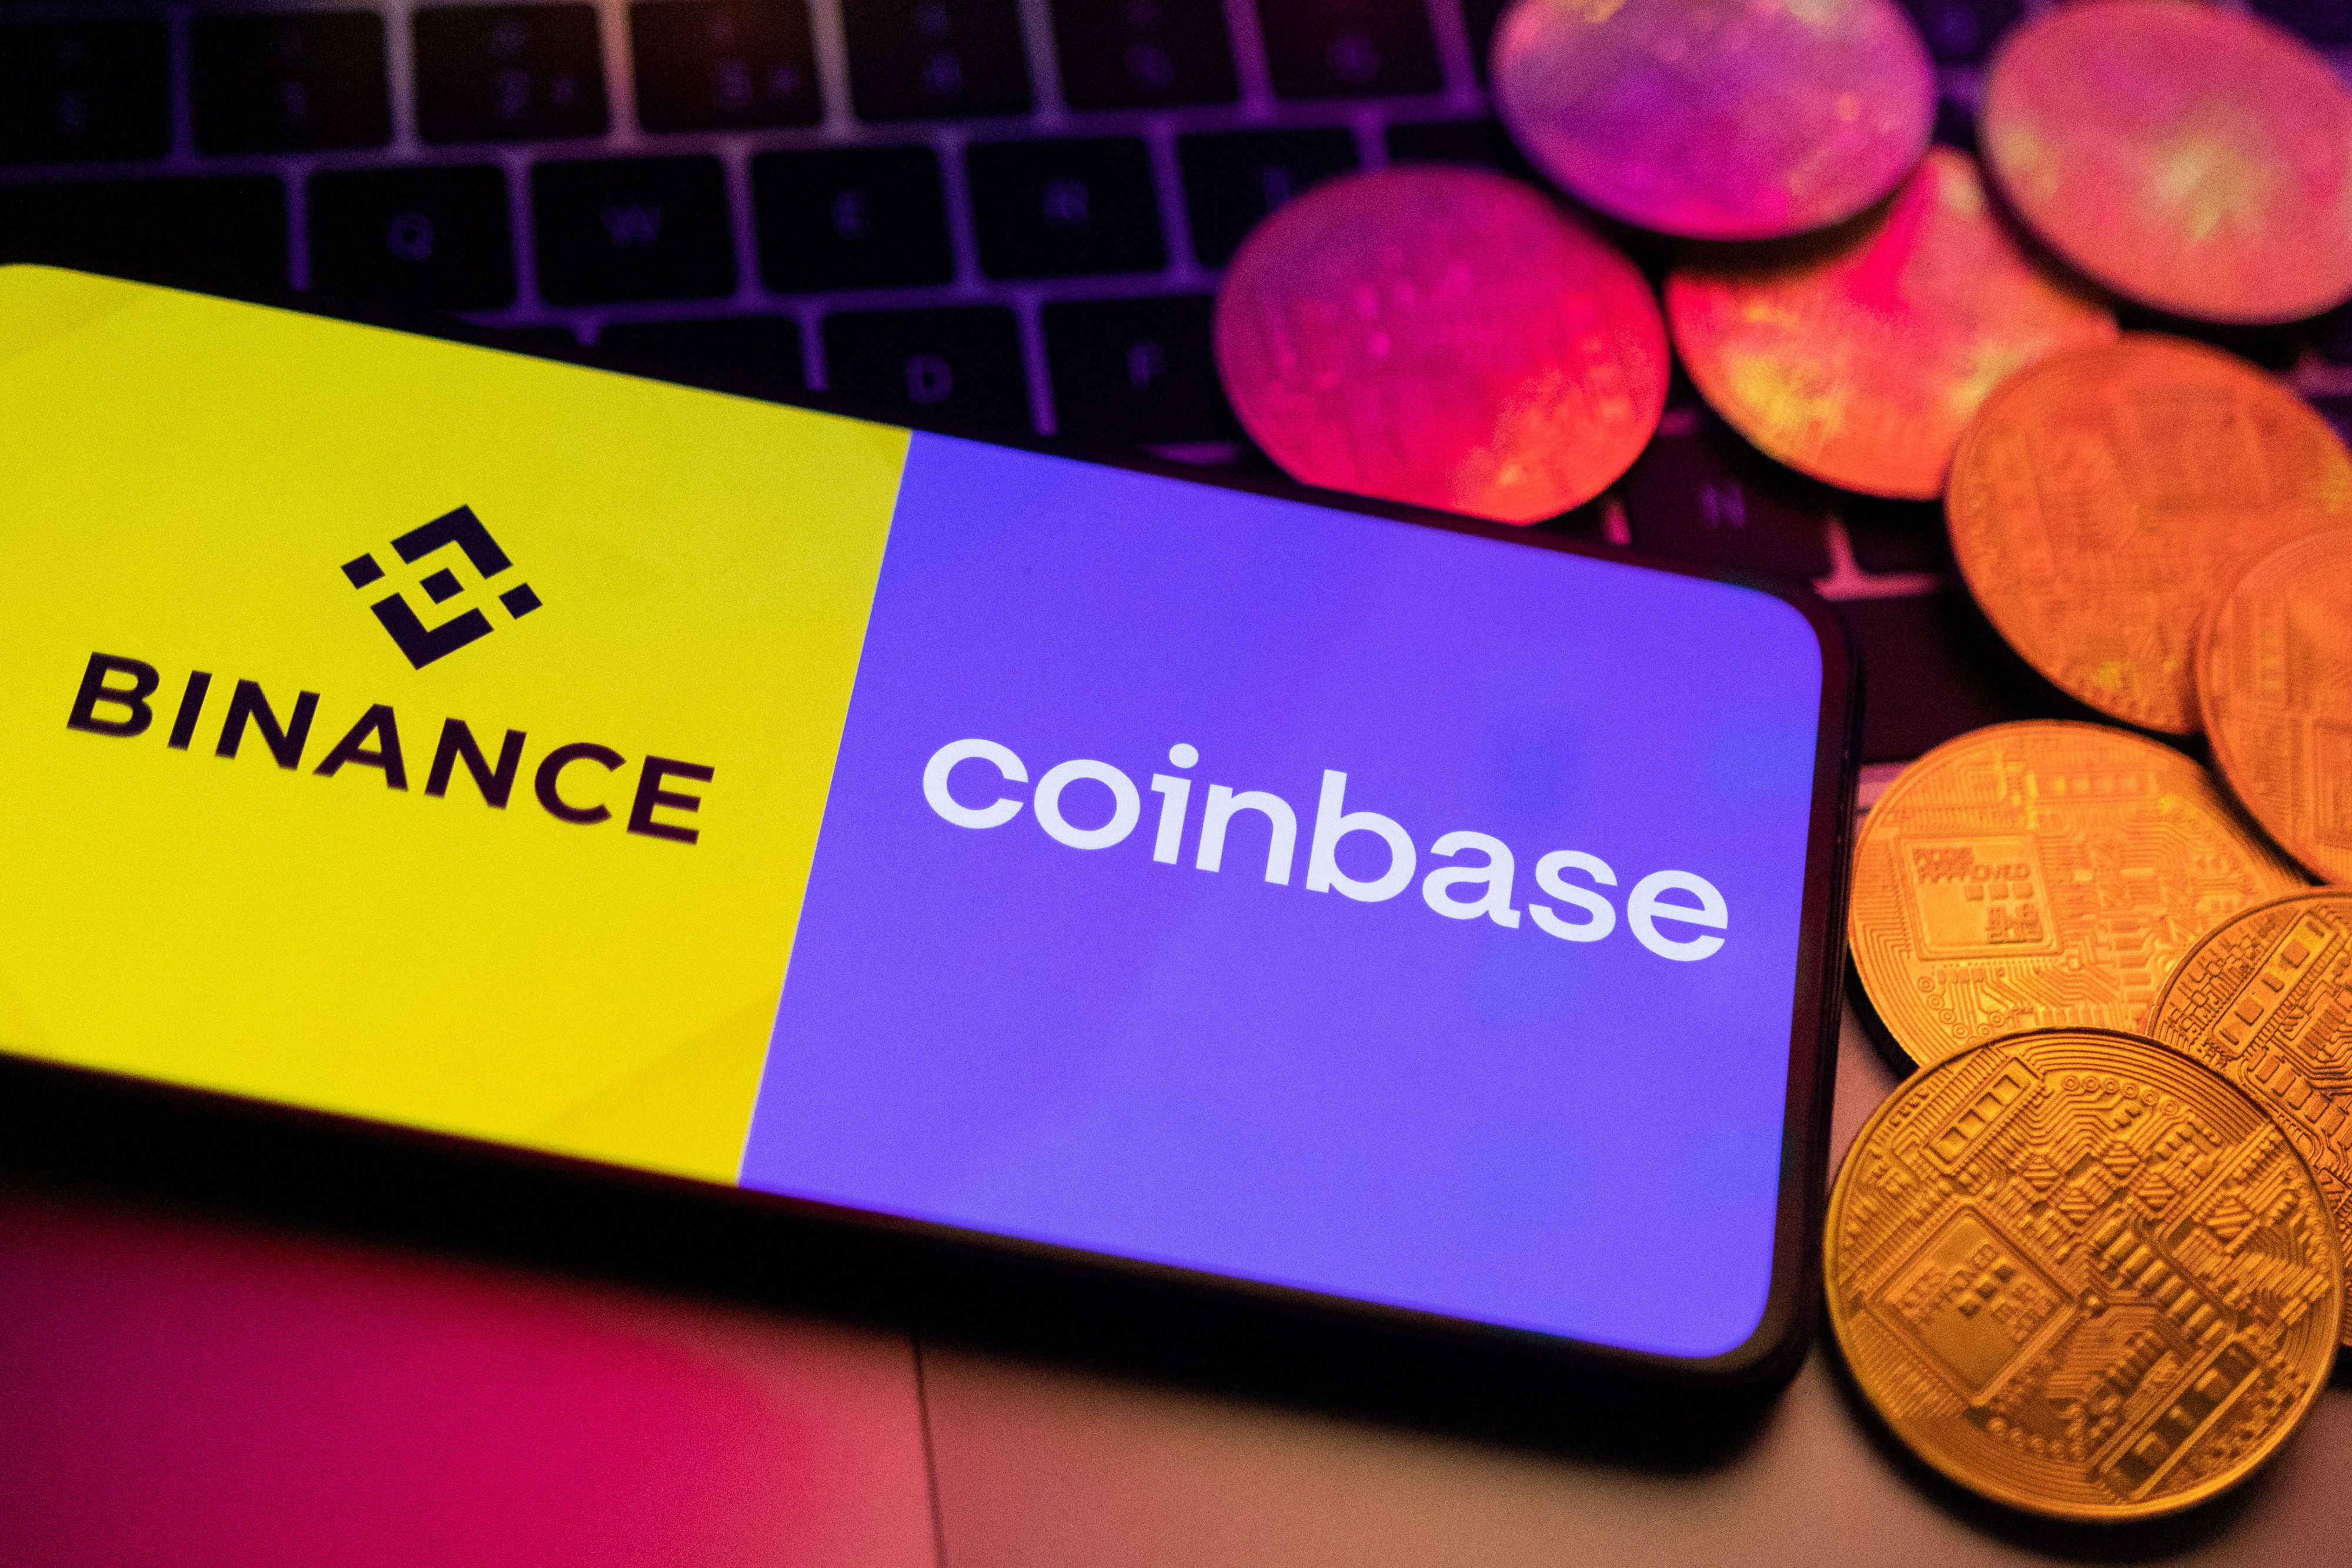 Illustration shows smartphone with displayed Binance and Coinbase logos